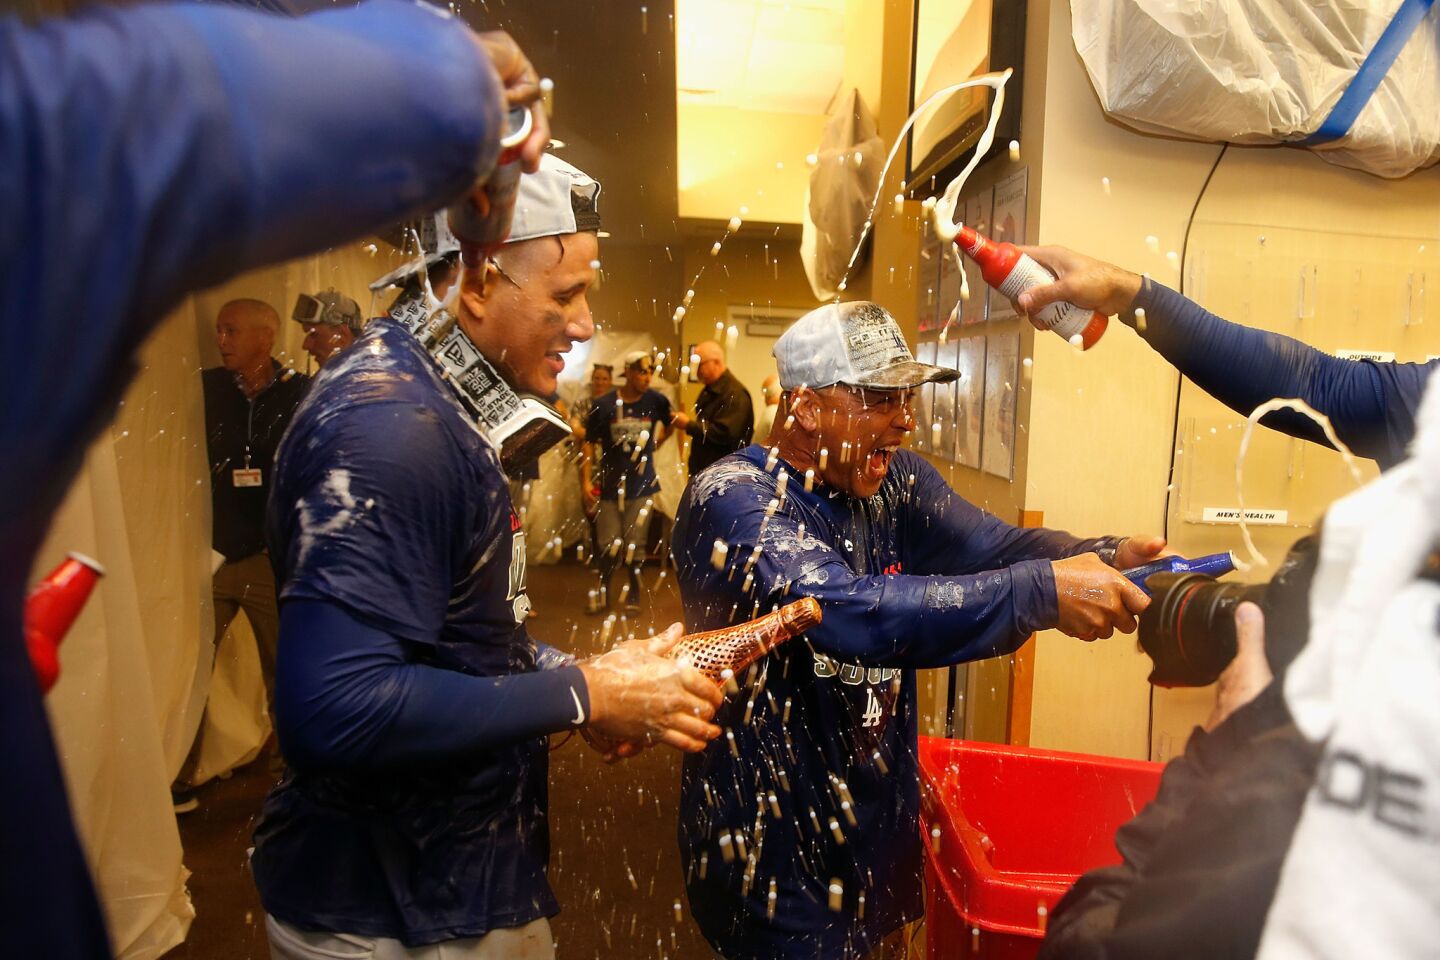 SAN FRANCISCO, CA - SEPTEMBER 29: Manny Machado #8 of the Los Angeles Dodgers and Manager Dave Roberts #30 celebrate after the Dodgers clinched a post season spot by defeating the San Francisco Giants at AT&T Park on September 29, 2018 in San Francisco, California. (Photo by Lachlan Cunningham/Getty Images) ** OUTS - ELSENT, FPG, CM - OUTS * NM, PH, VA if sourced by CT, LA or MoD **